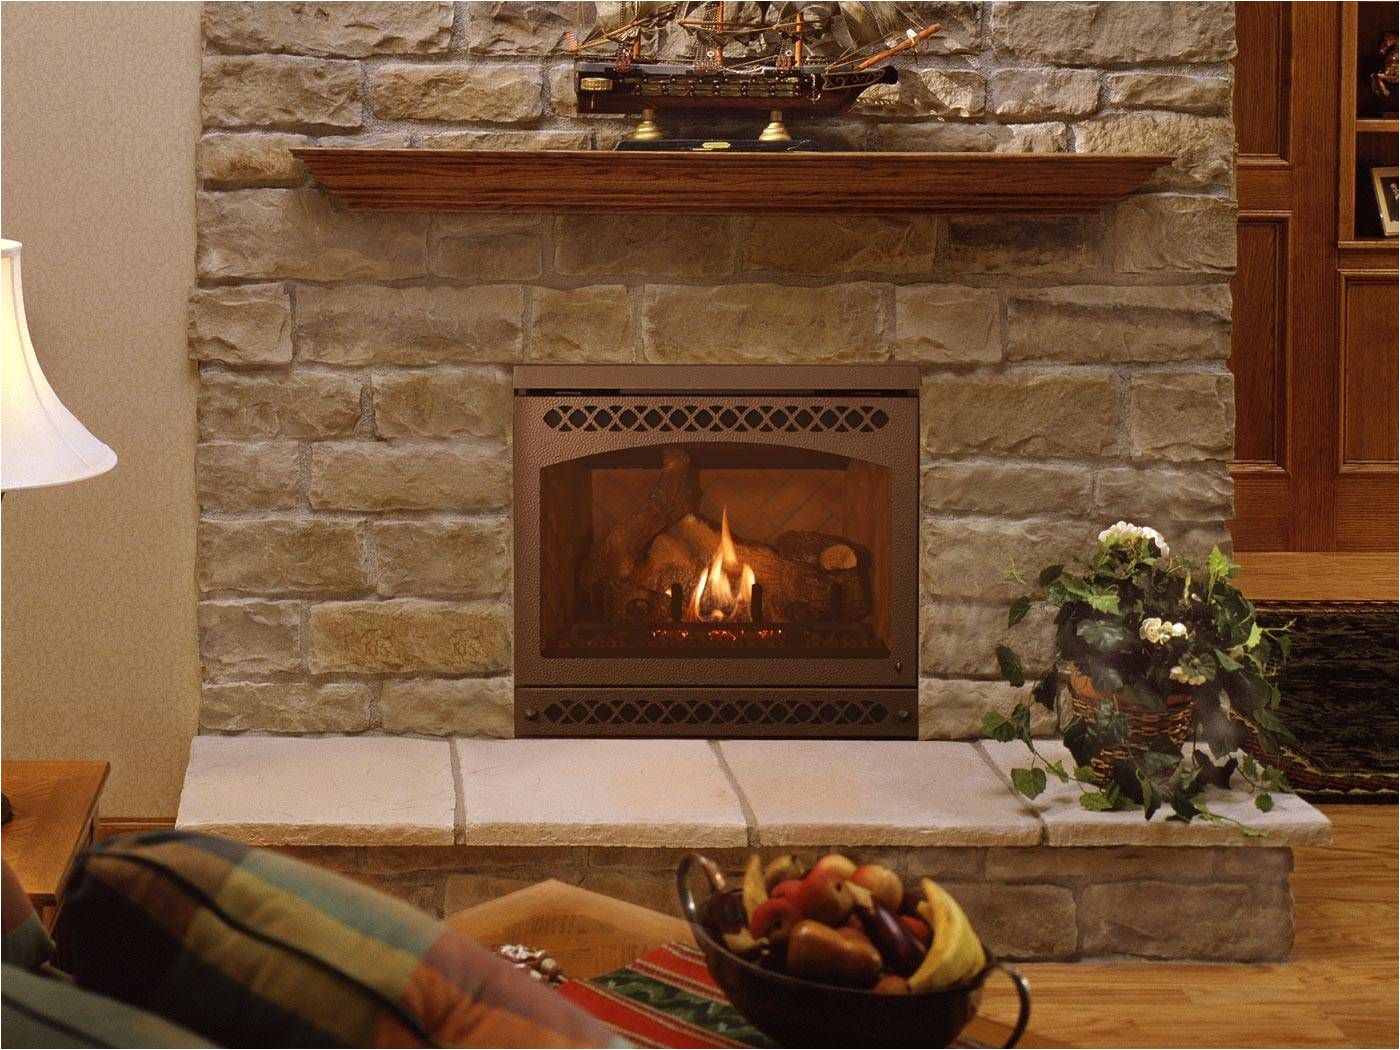 Quadra Fire Fireplace Inspirational Gas Fireplace without Mantle